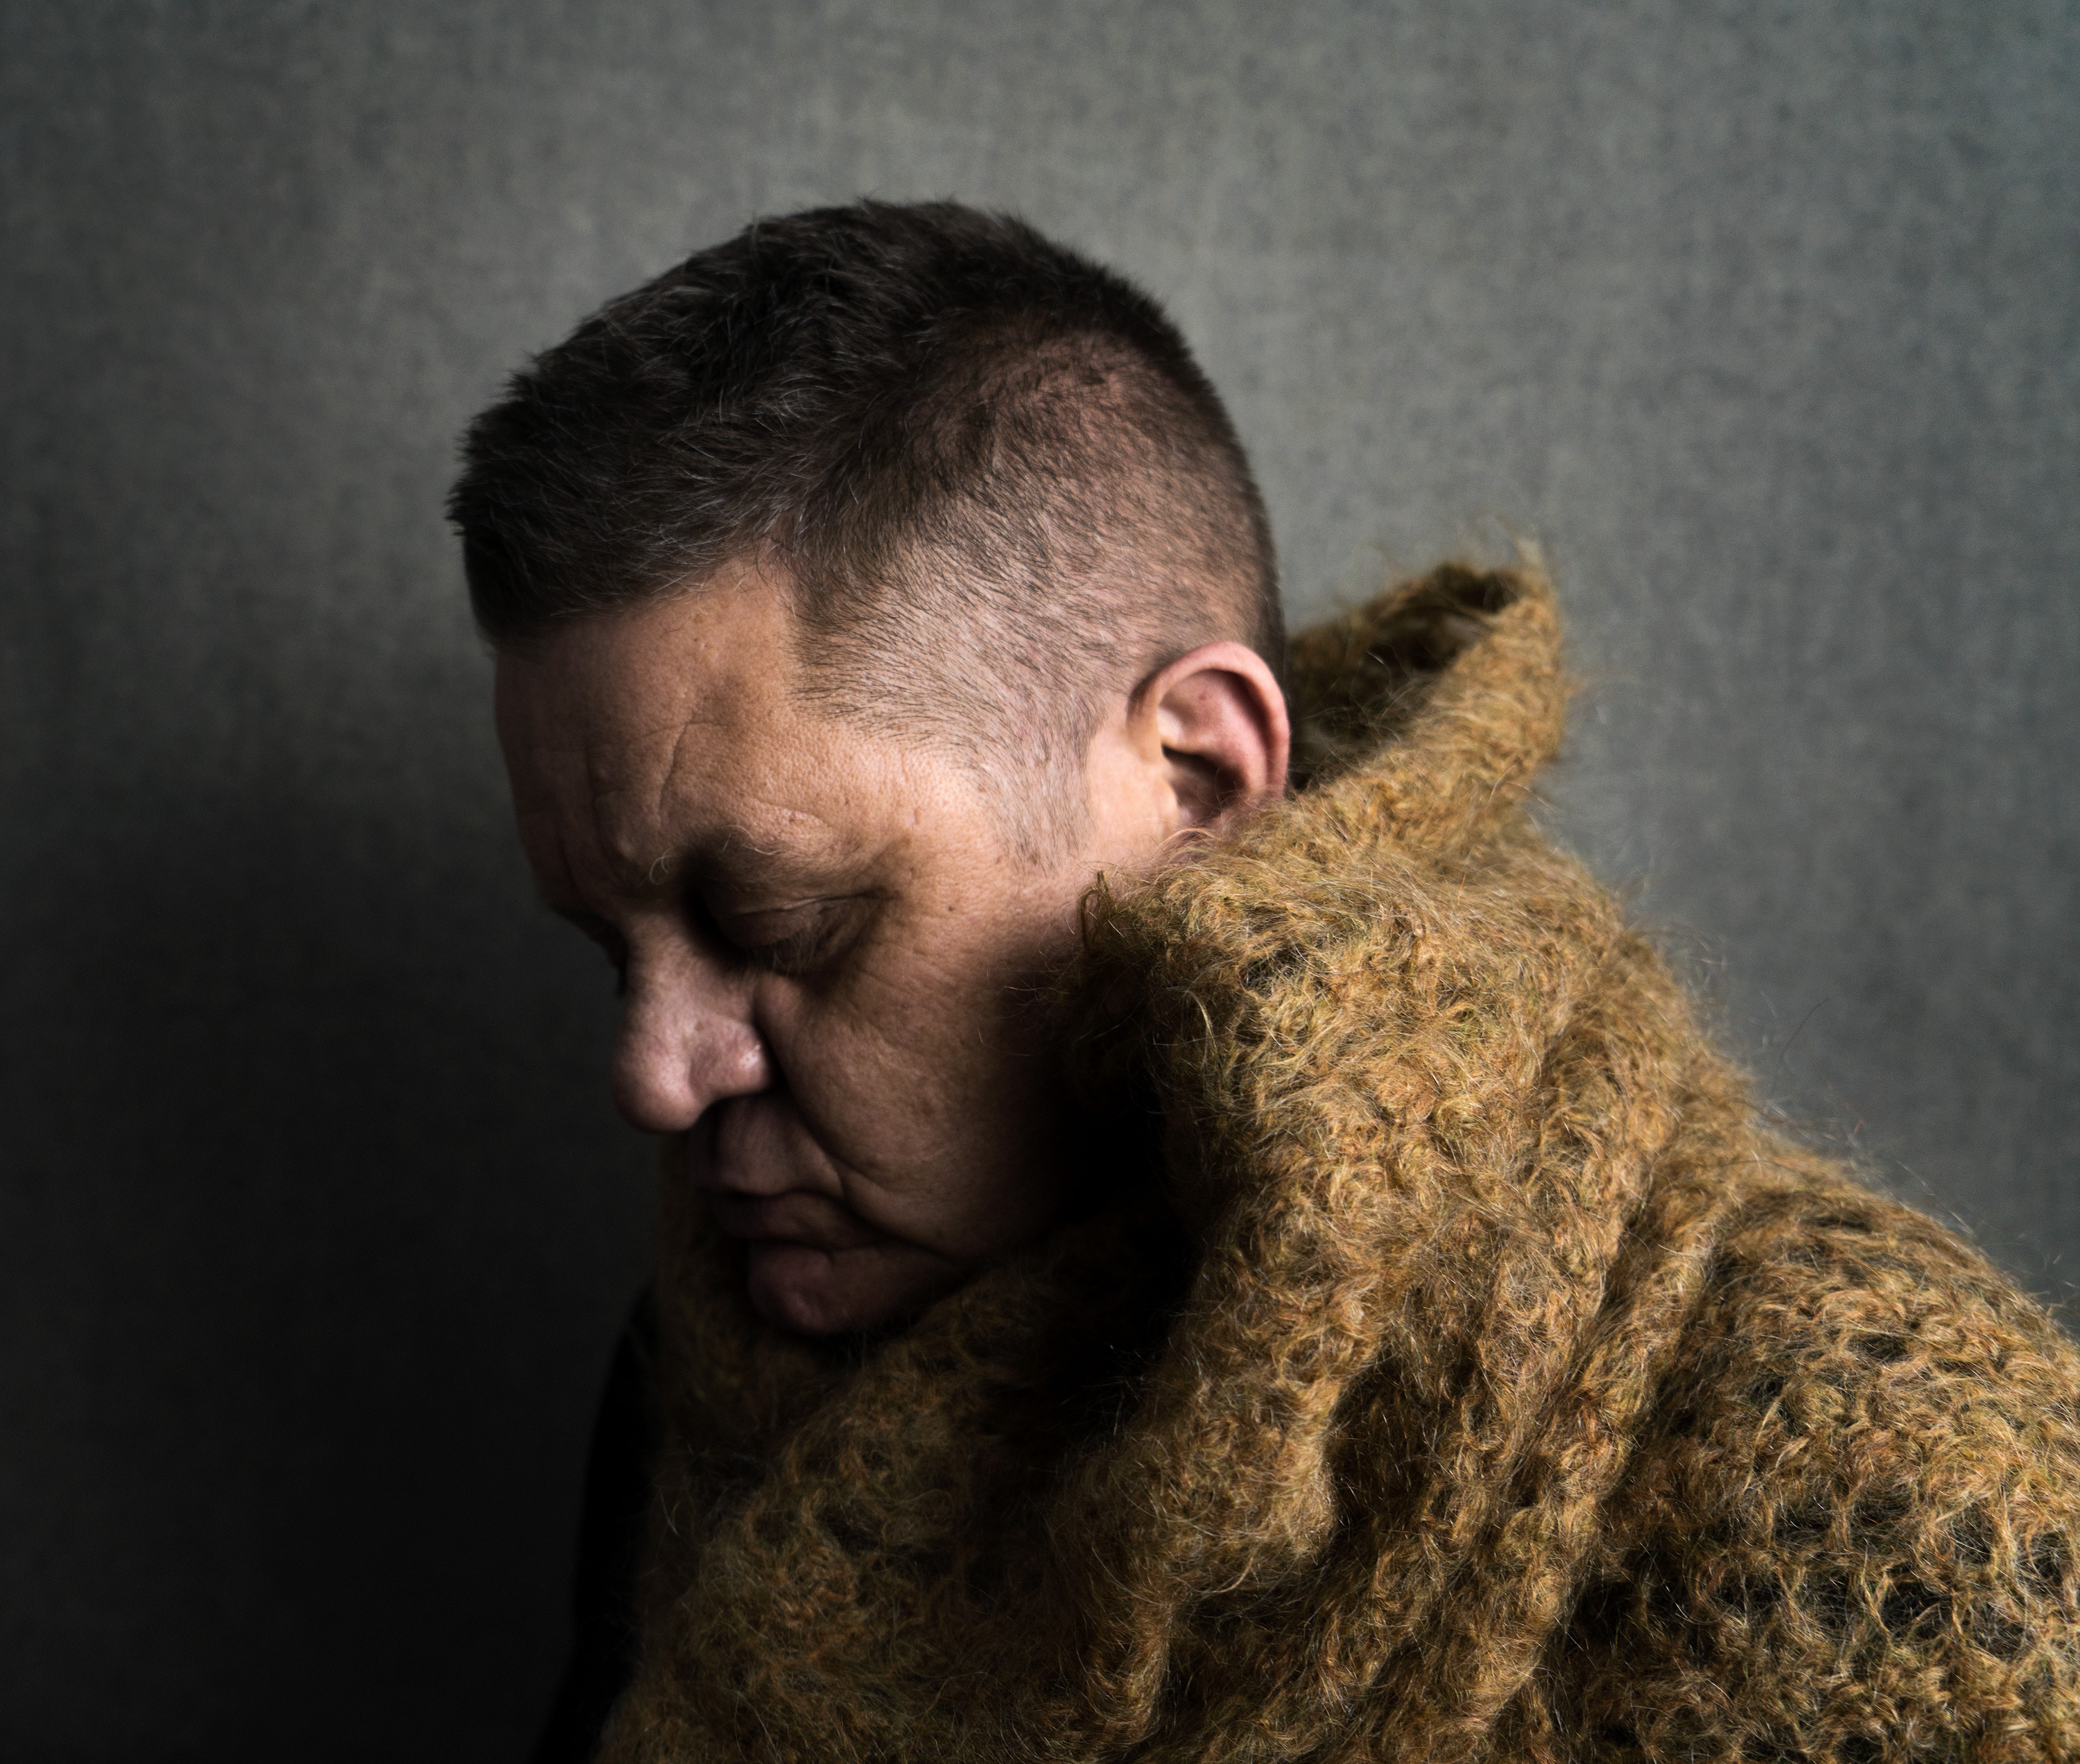 A person is photographed from the shoulders up in profile with eyes cast down and wearing a knit olive coat